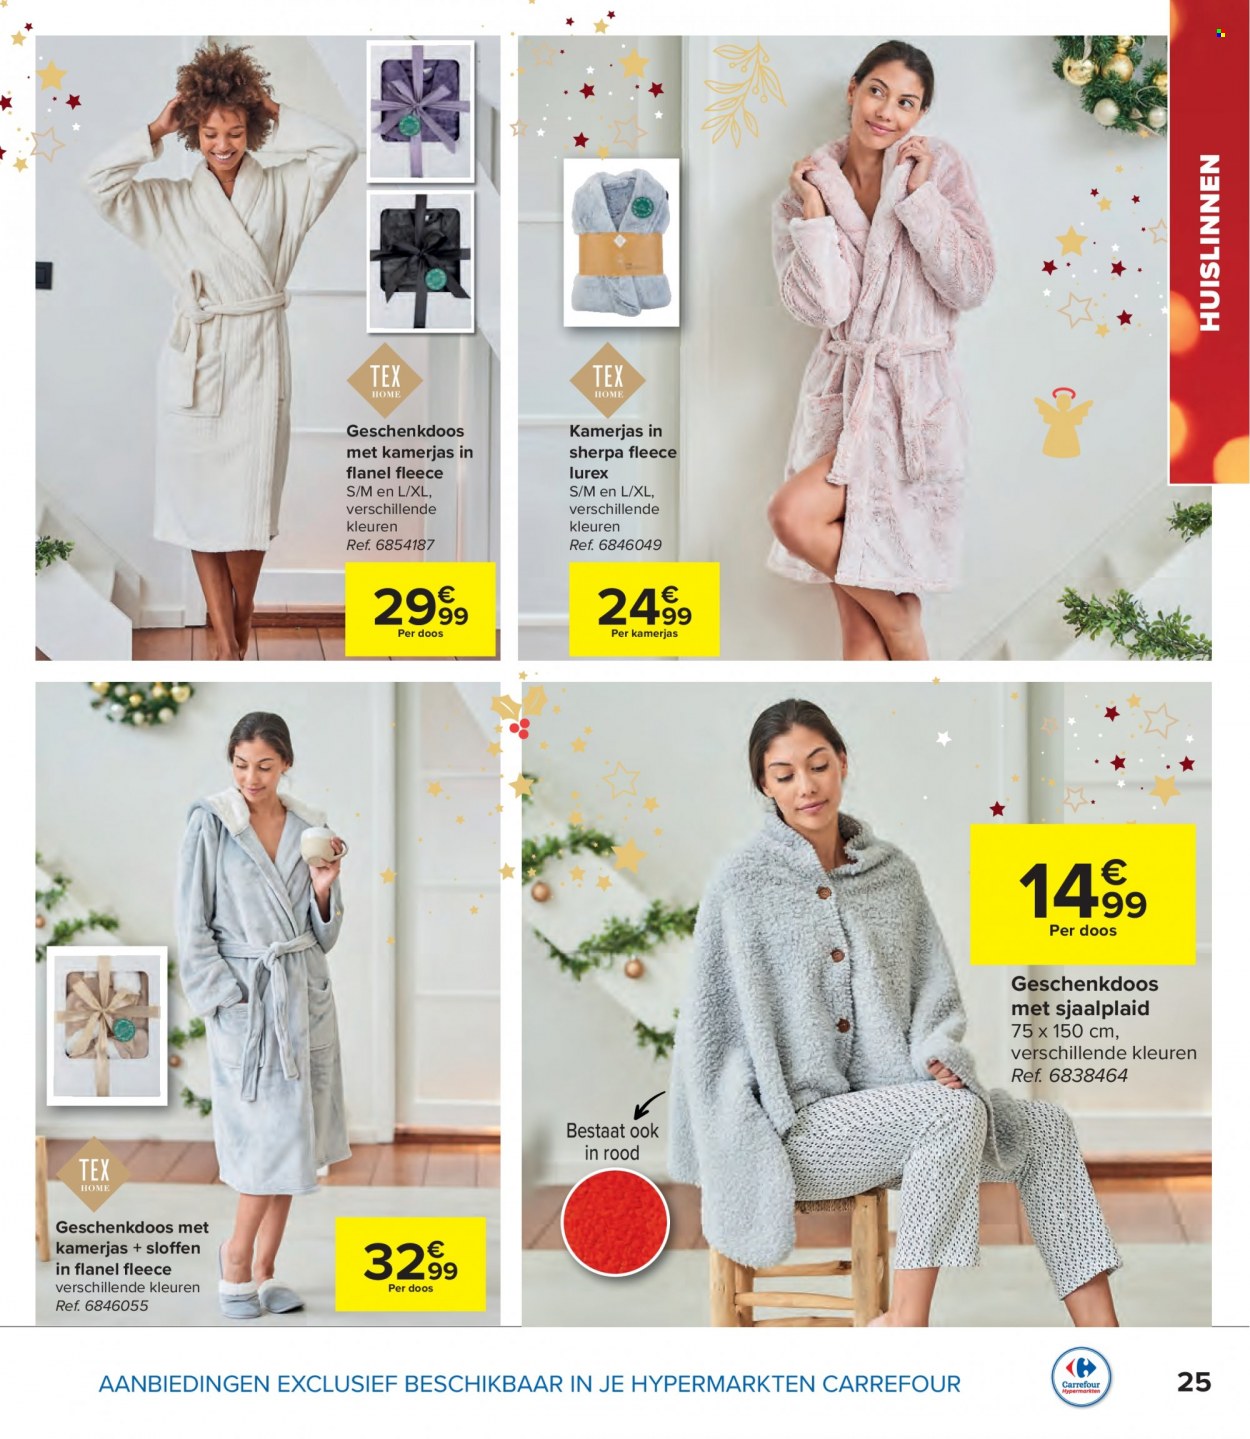 Catalogue Carrefour hypermarkt - 16.11.2022 - 31.12.2022. Page 25.